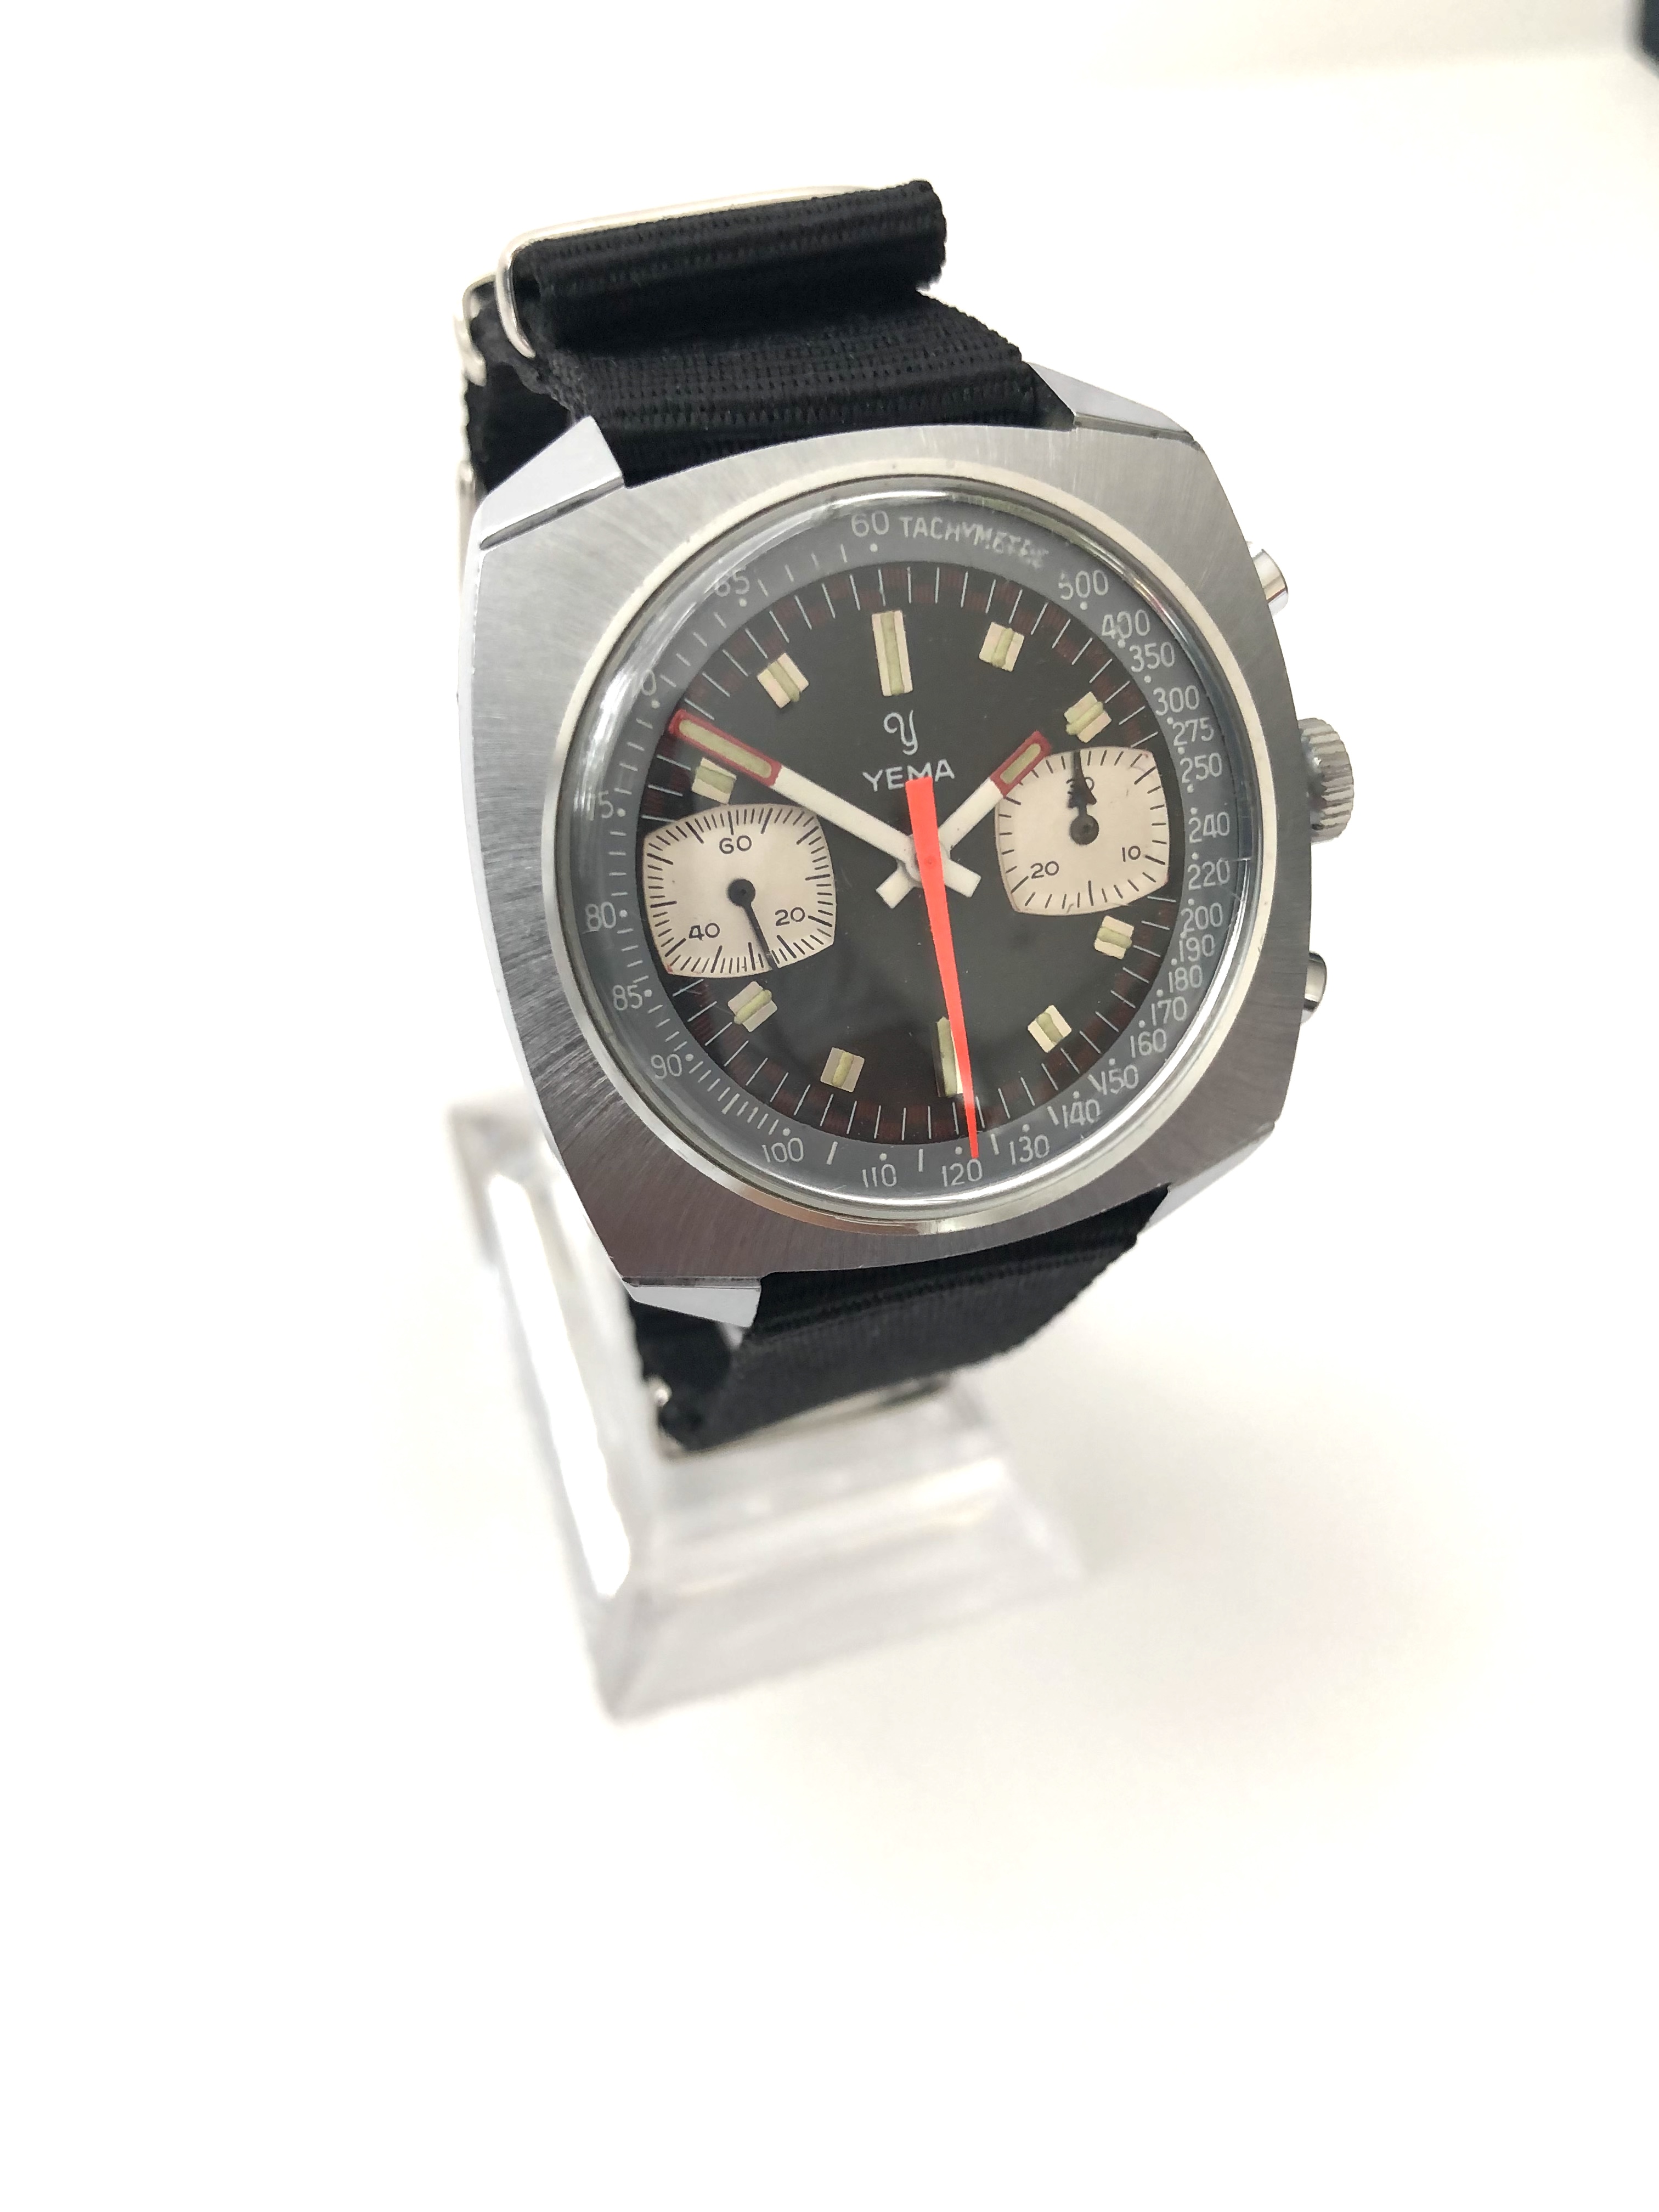 A Rare Find Vintage Yema Panda Dial Chronograph In Amazing Condition - Image 5 of 11